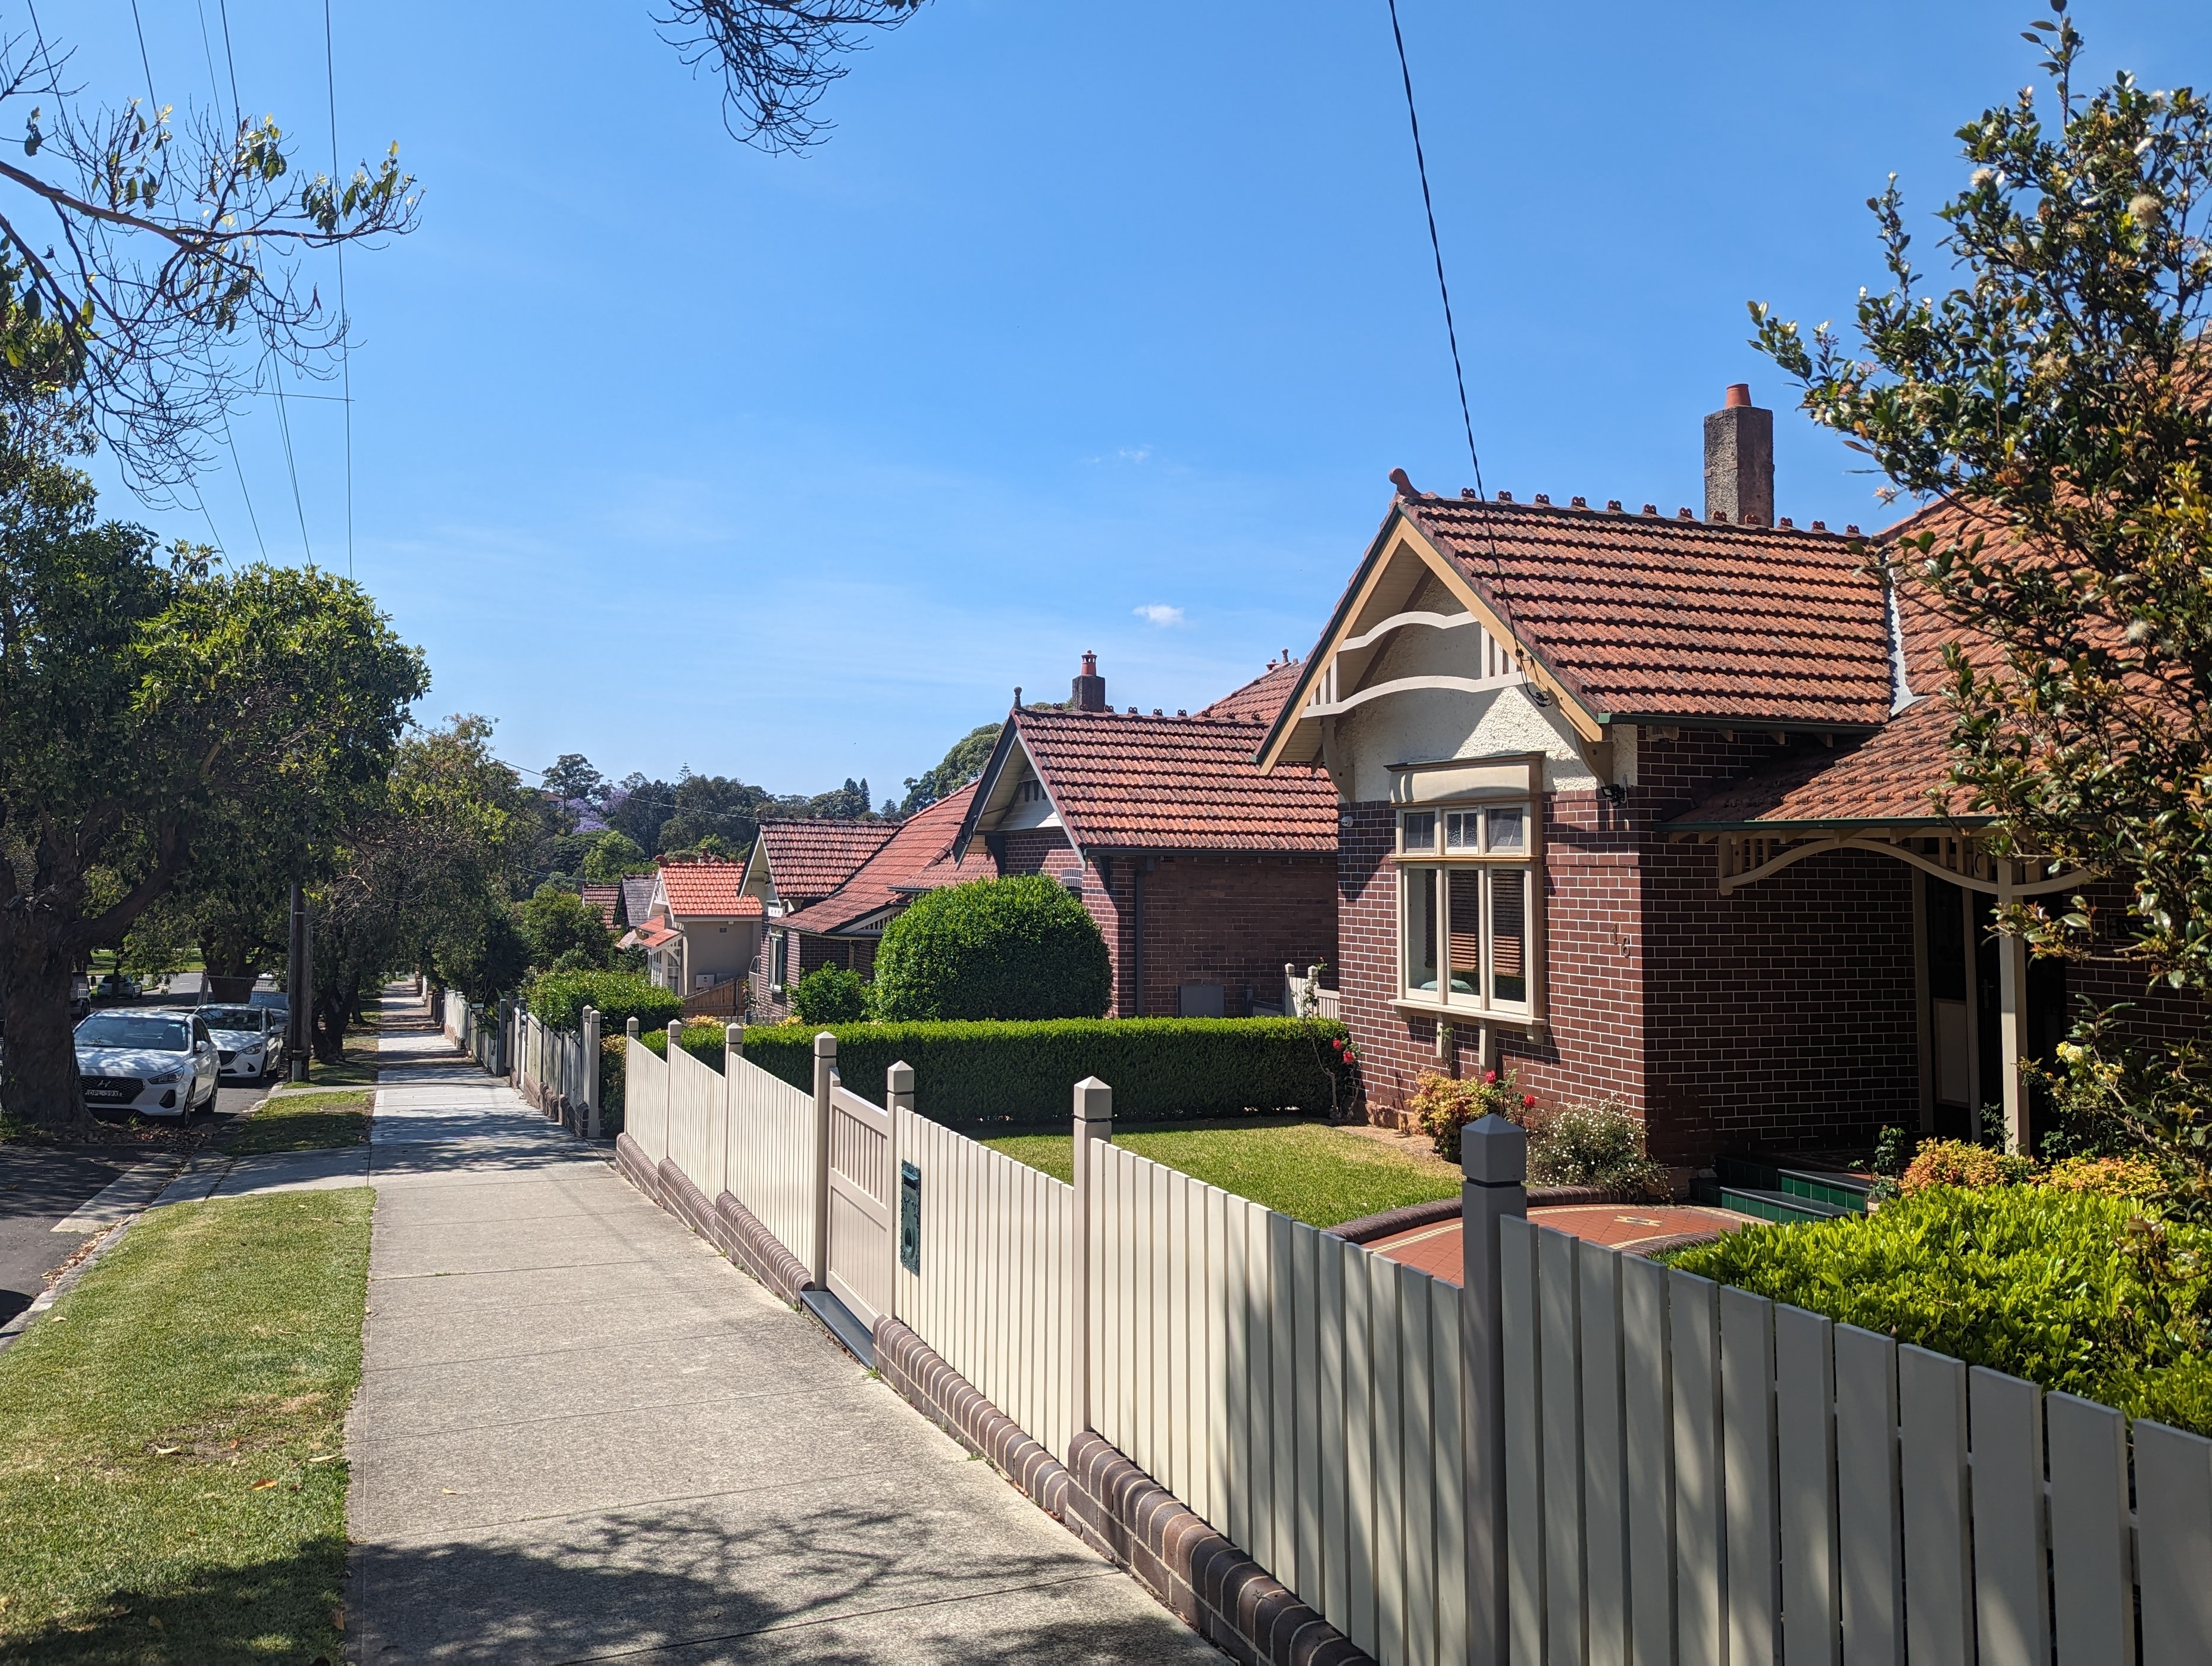 A row of Federation-era bungalow style houses along a residential street.